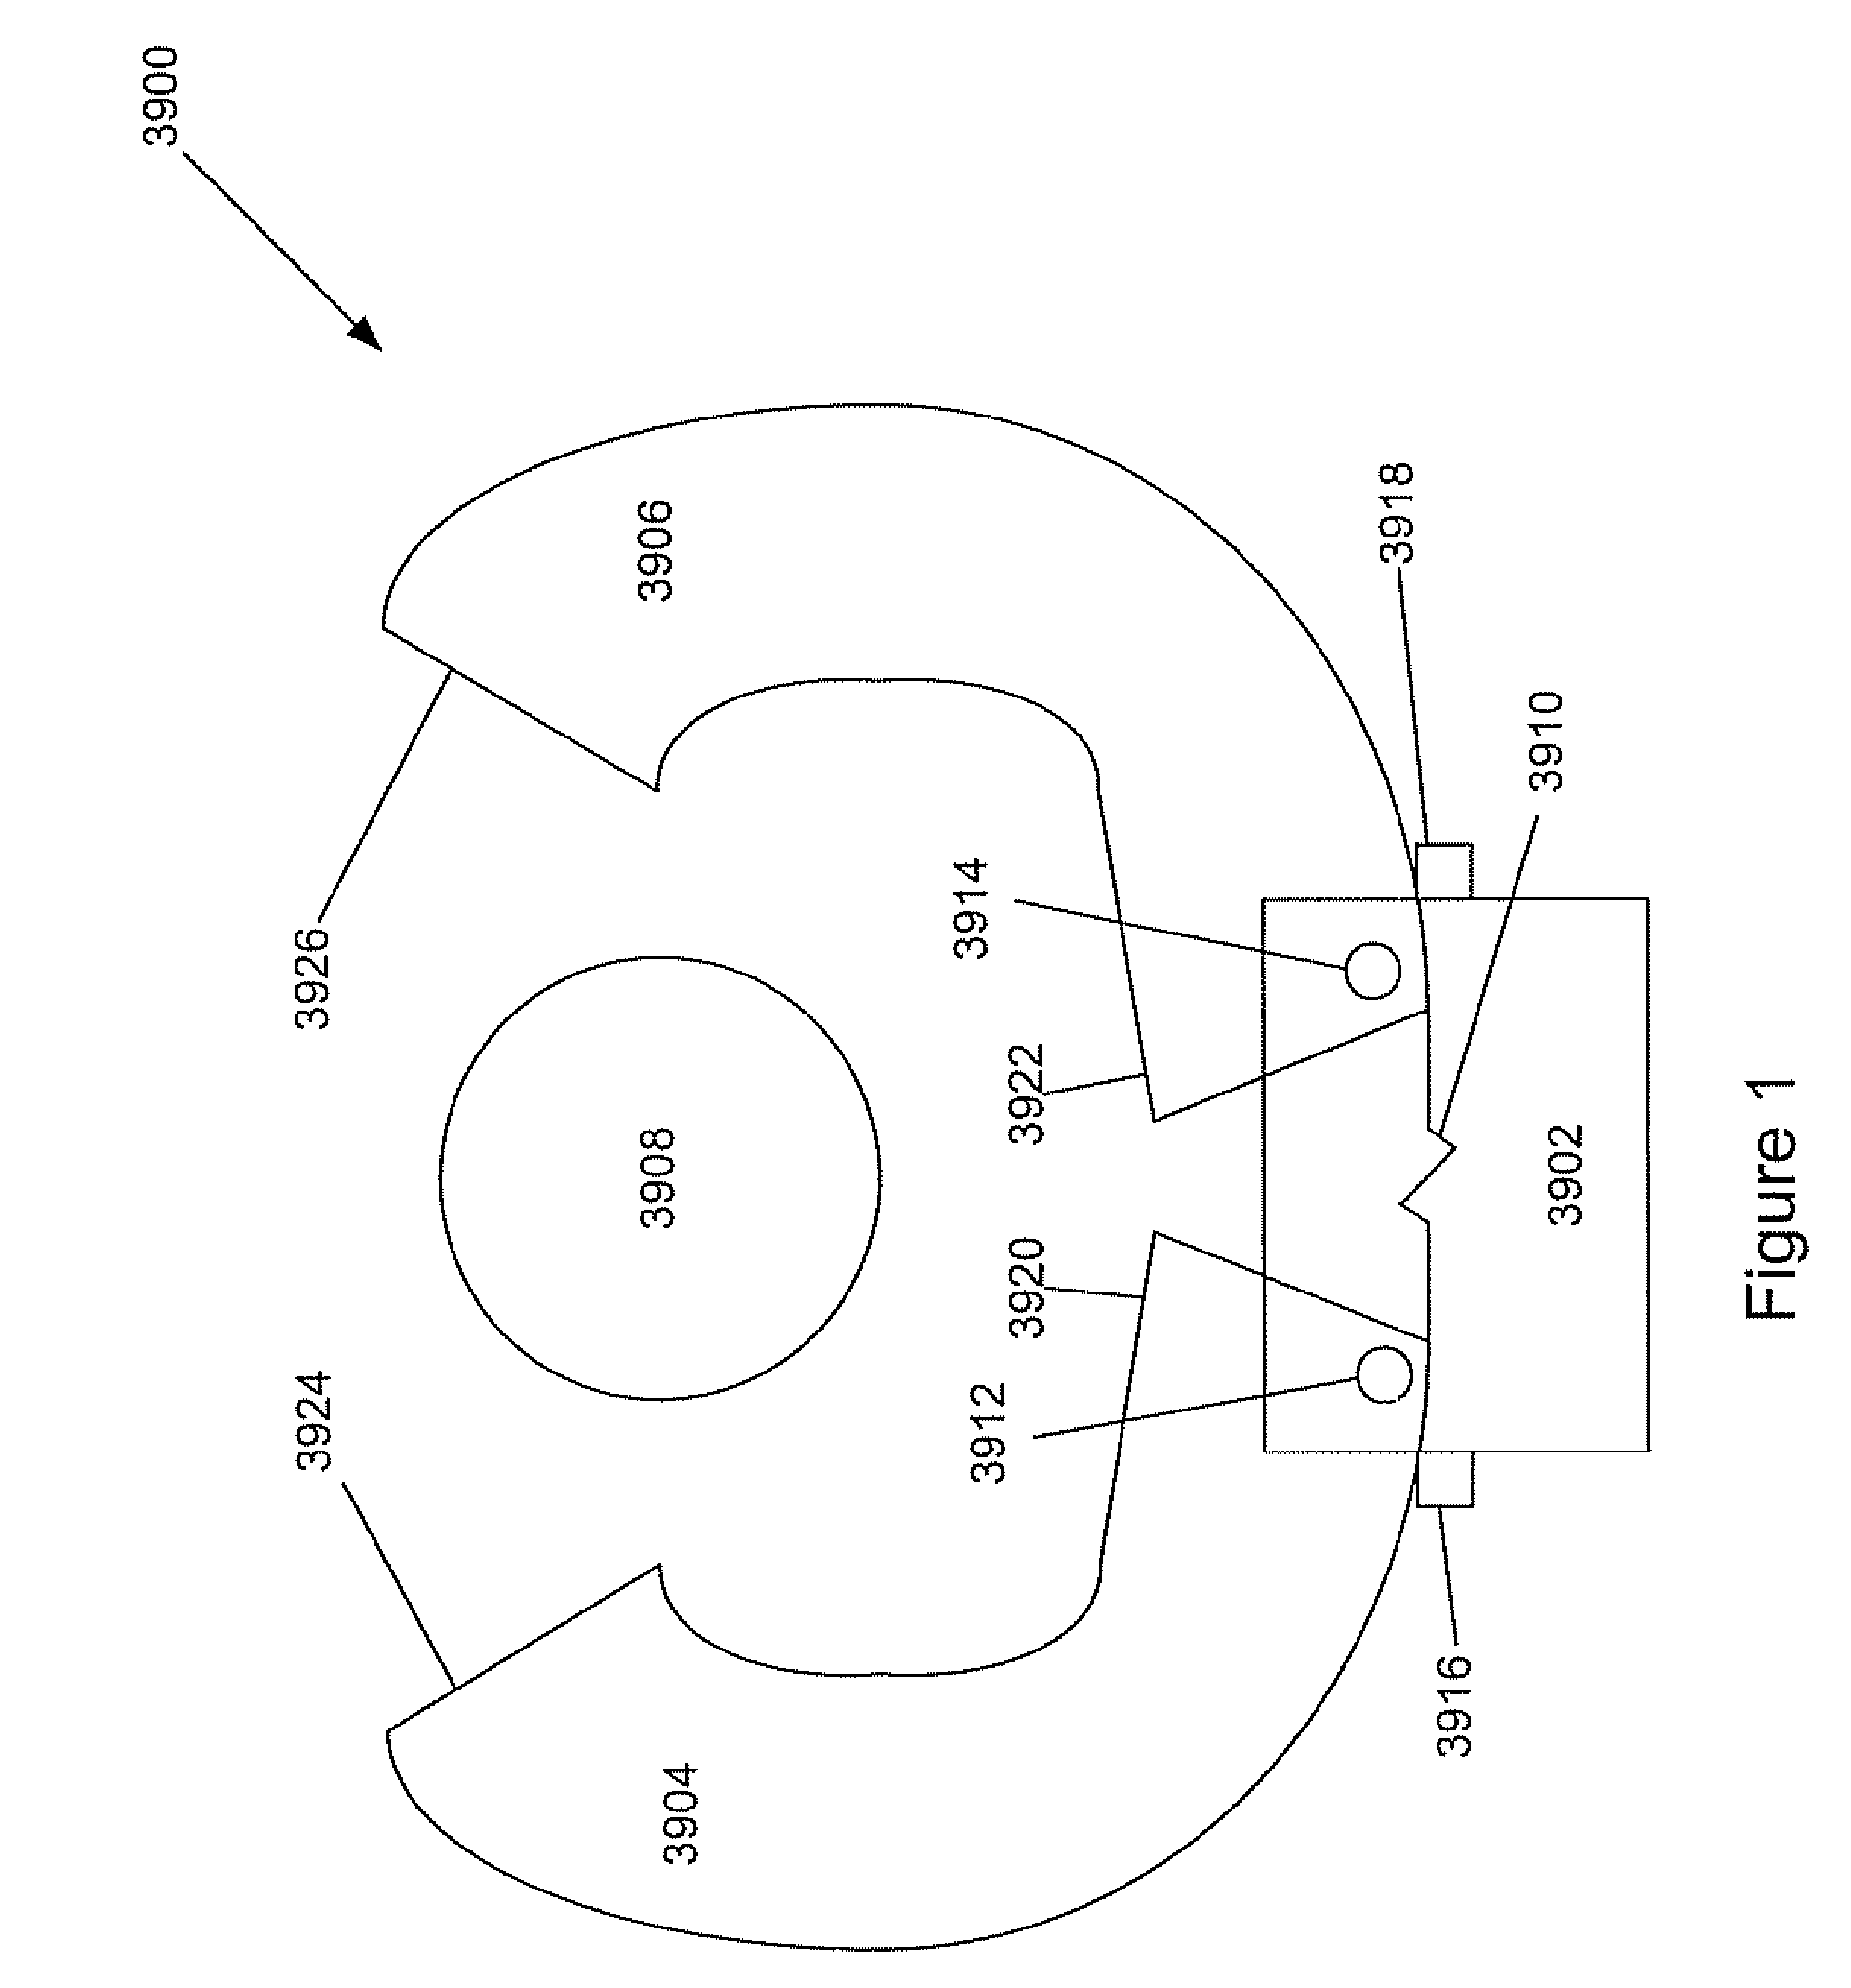 Systems and methods for installation of clamshell devices around an element